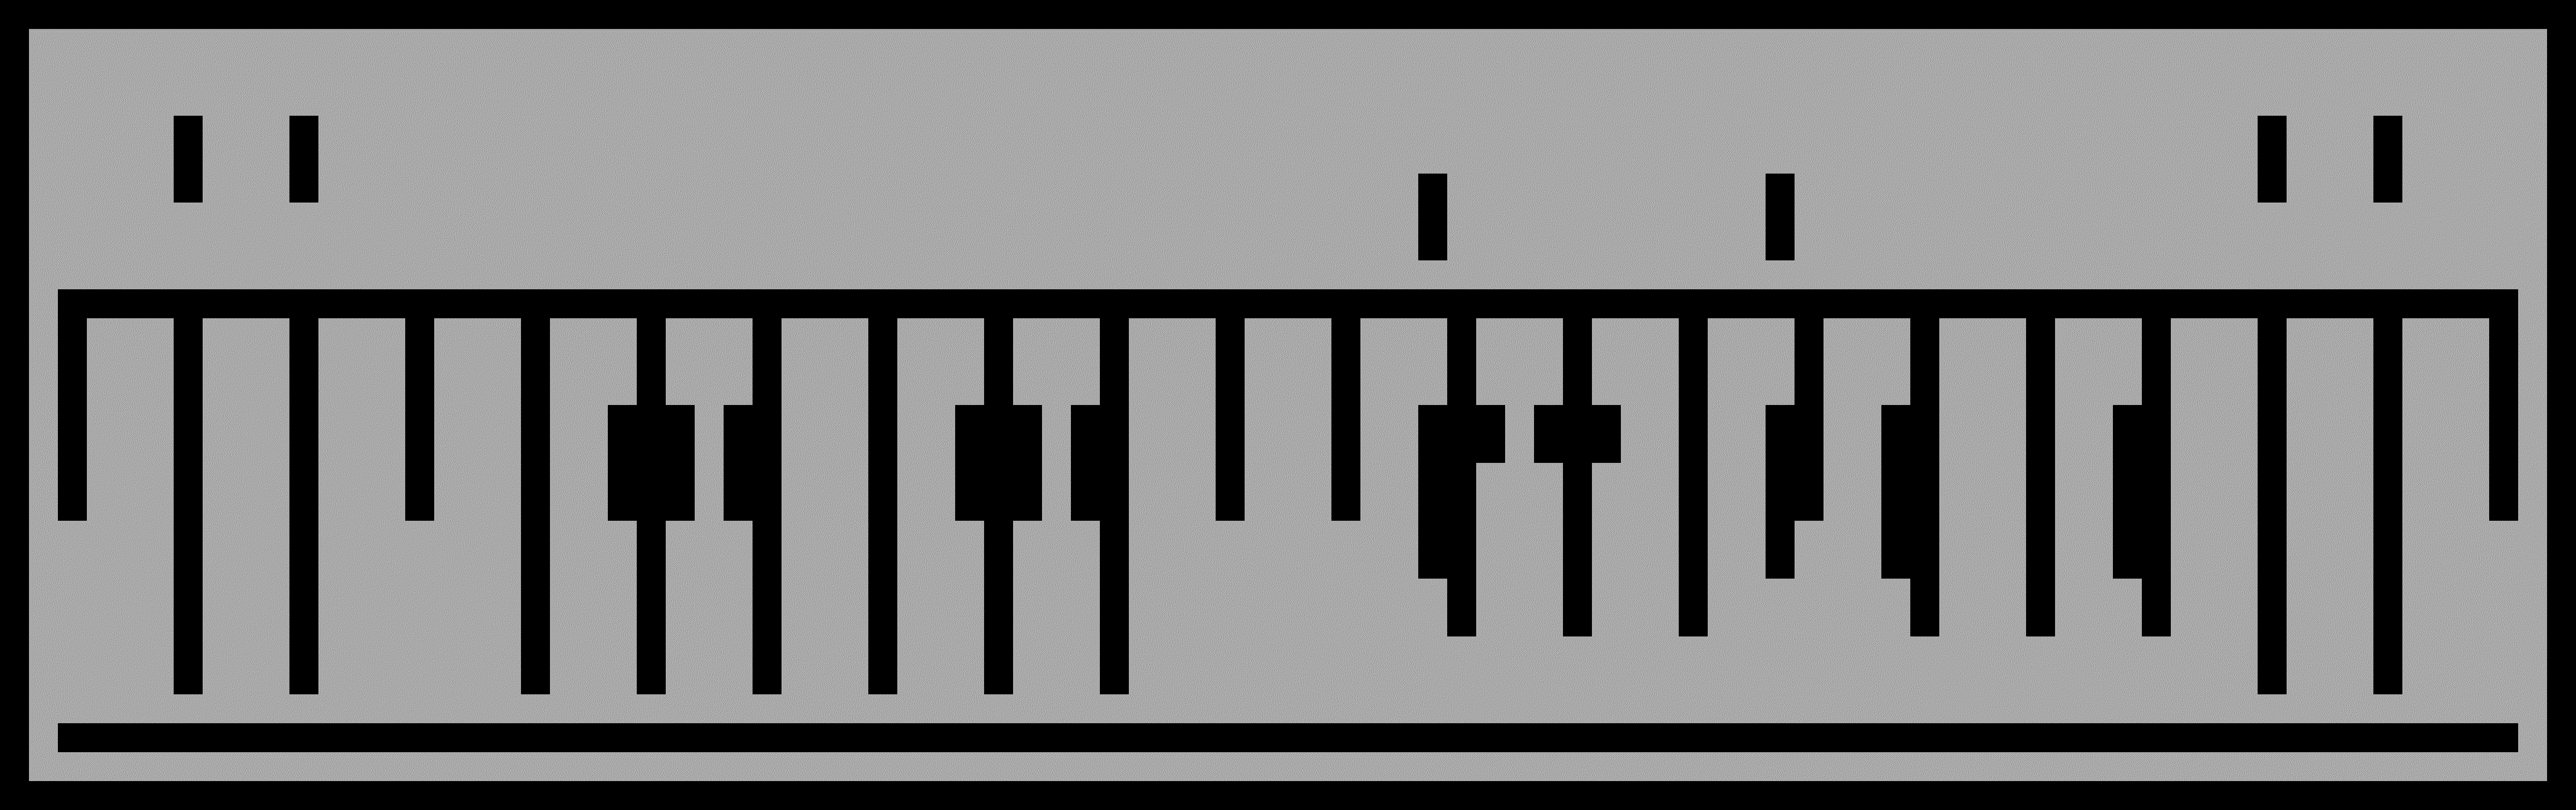 A gif of a gray grid slowly being filled in with solved white and black tiles in the shape of a digital keyboard.